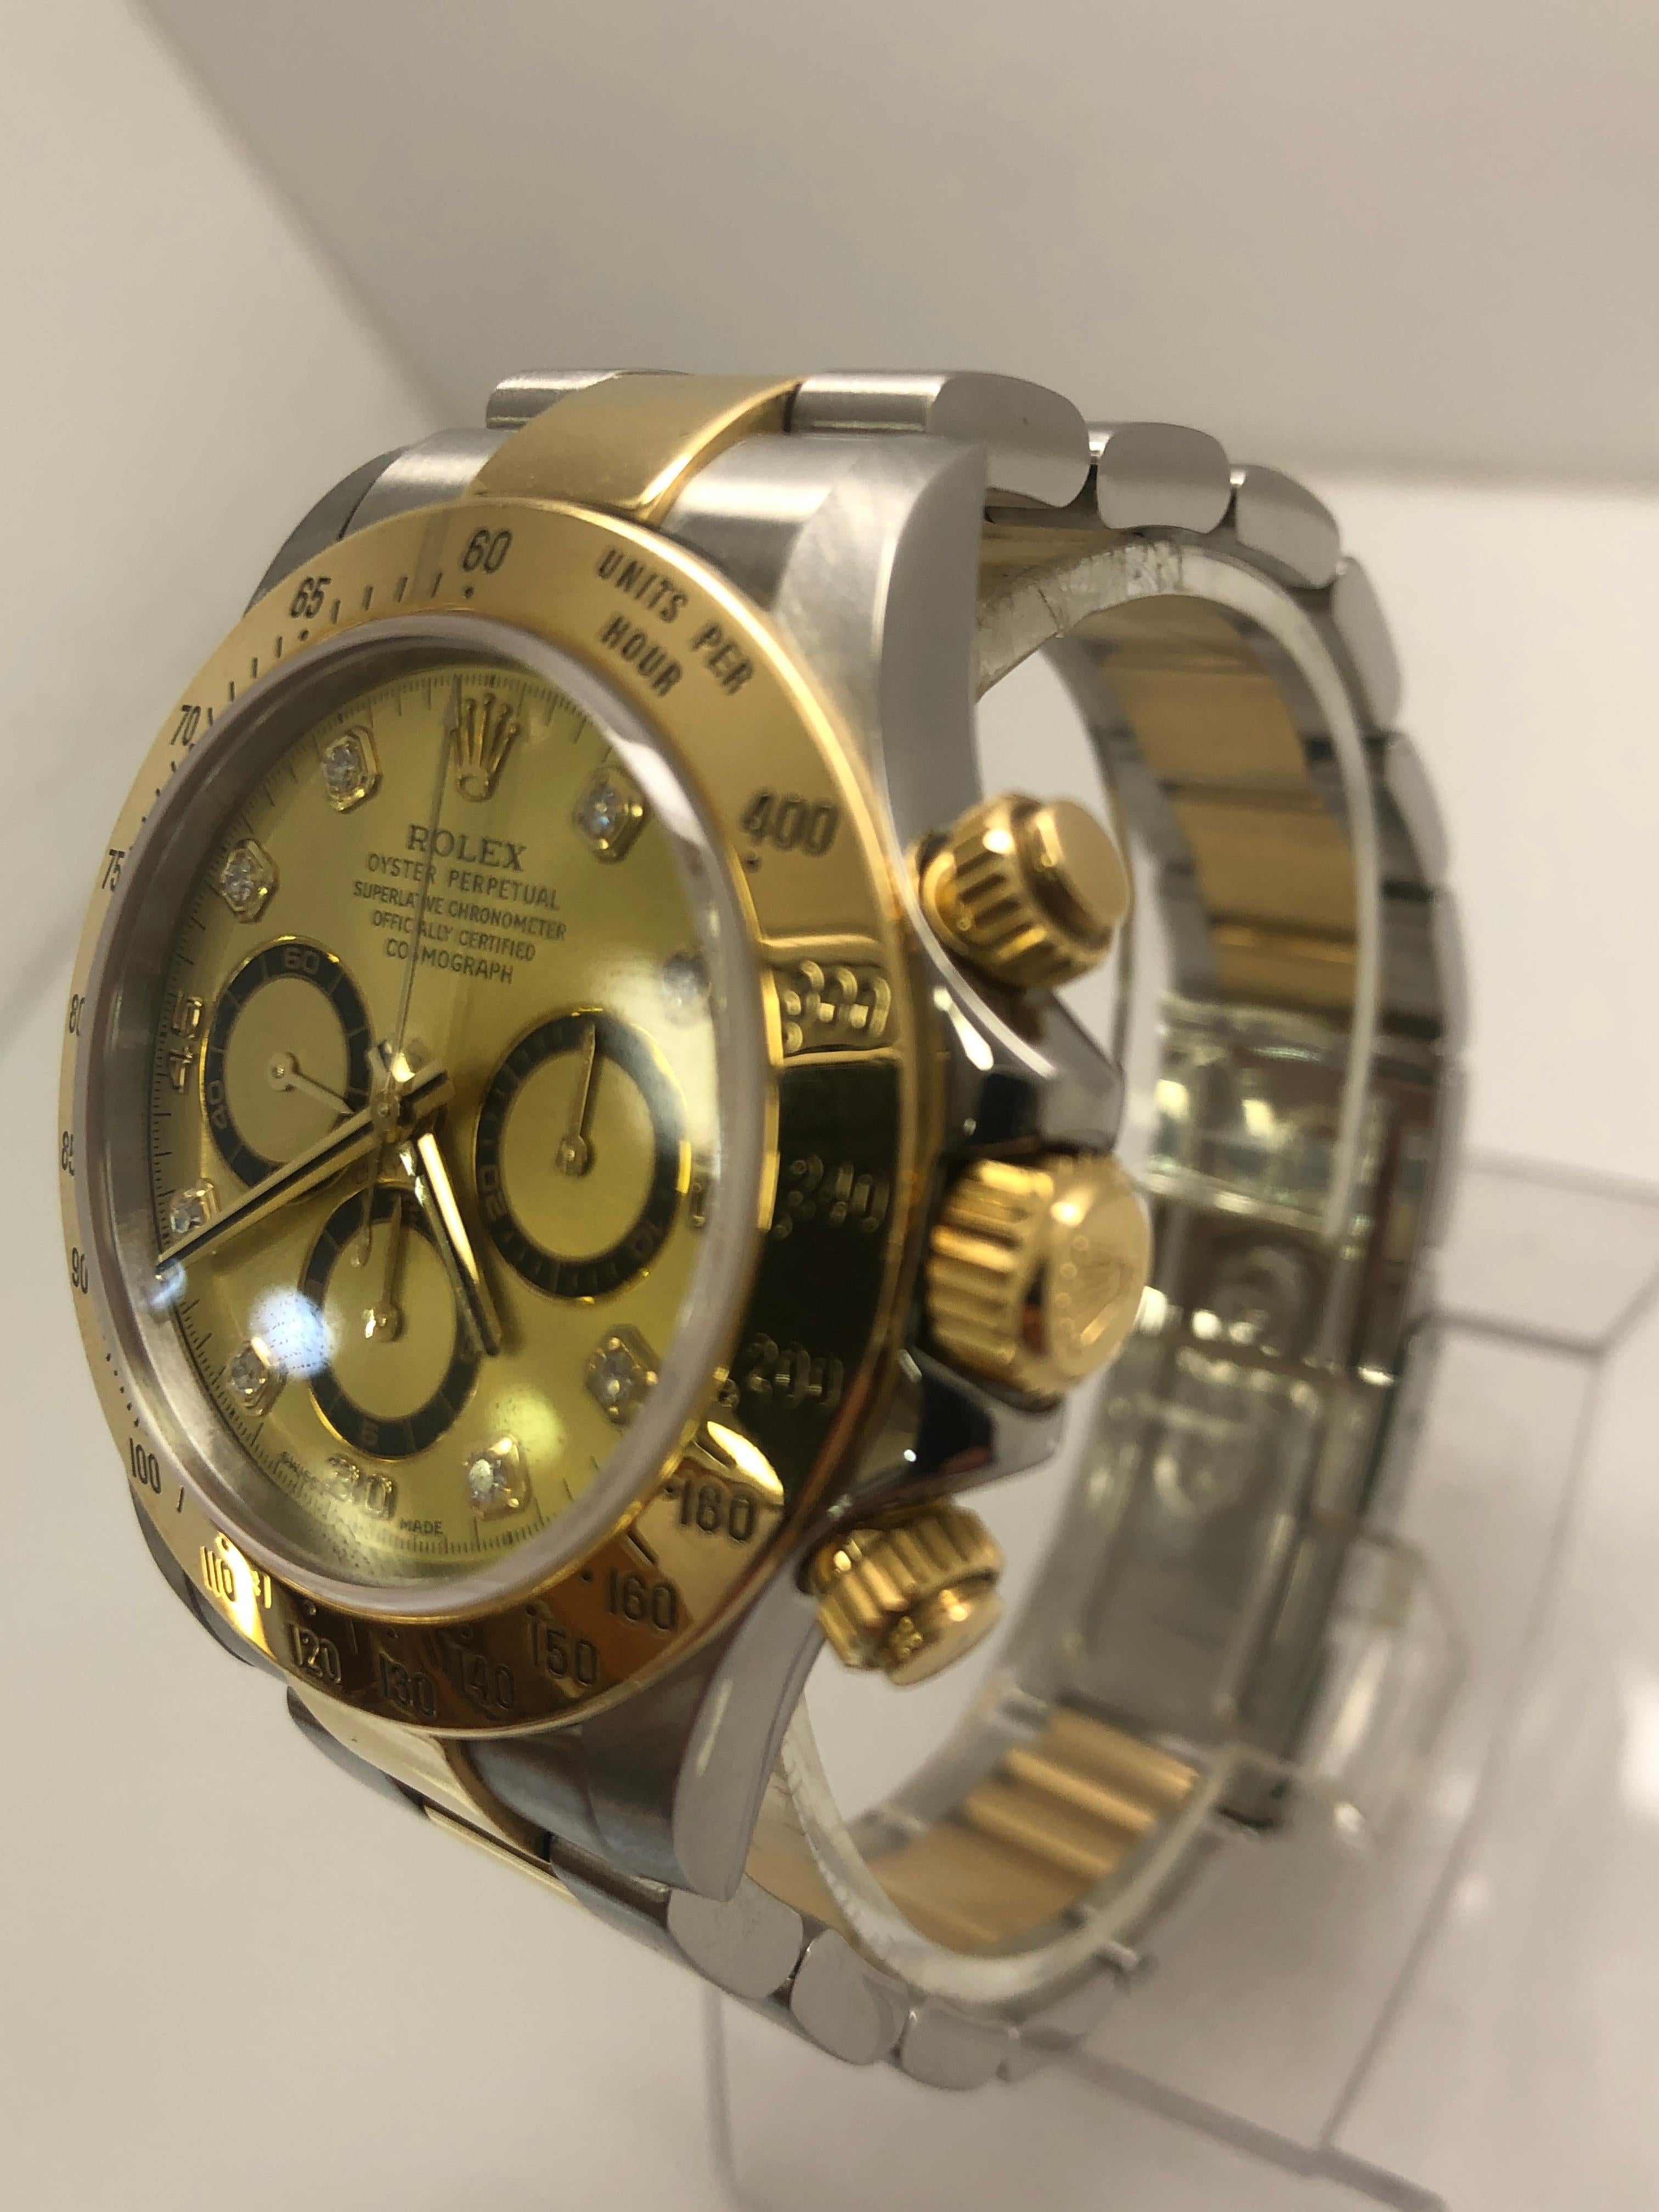 Rolex Daytona Two Tone Diamond Dial Men's Watch

excellent condition

comes with original papers

all original Rolex parts

shop with confidence

free overnight shipping 

5 year warranty